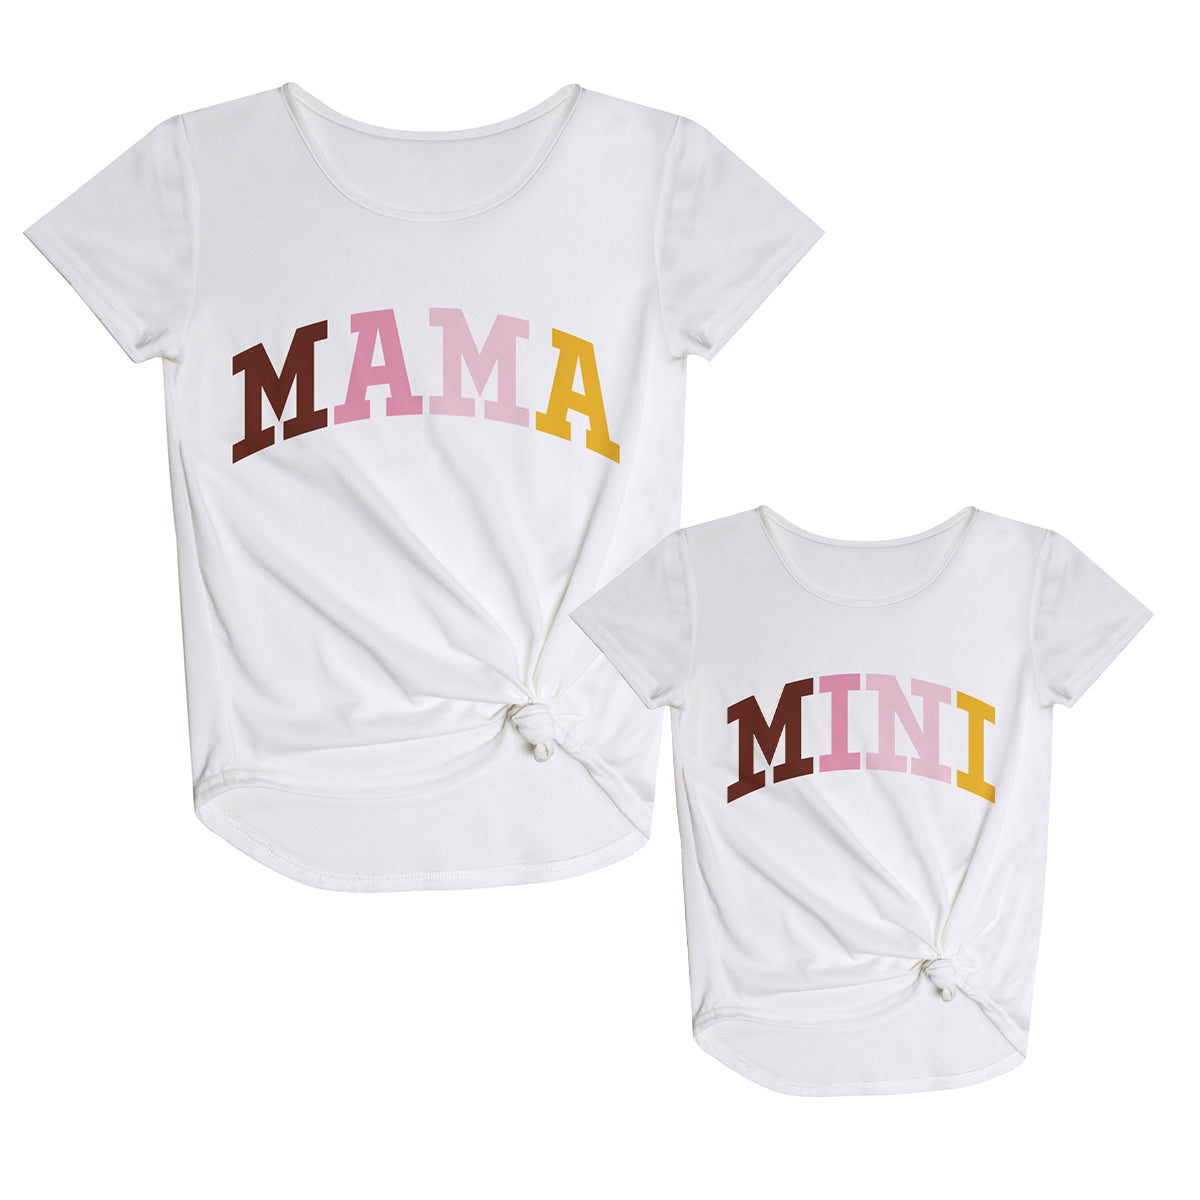 Mama White Short Sleeve Knot Top - Wimziy&Co.